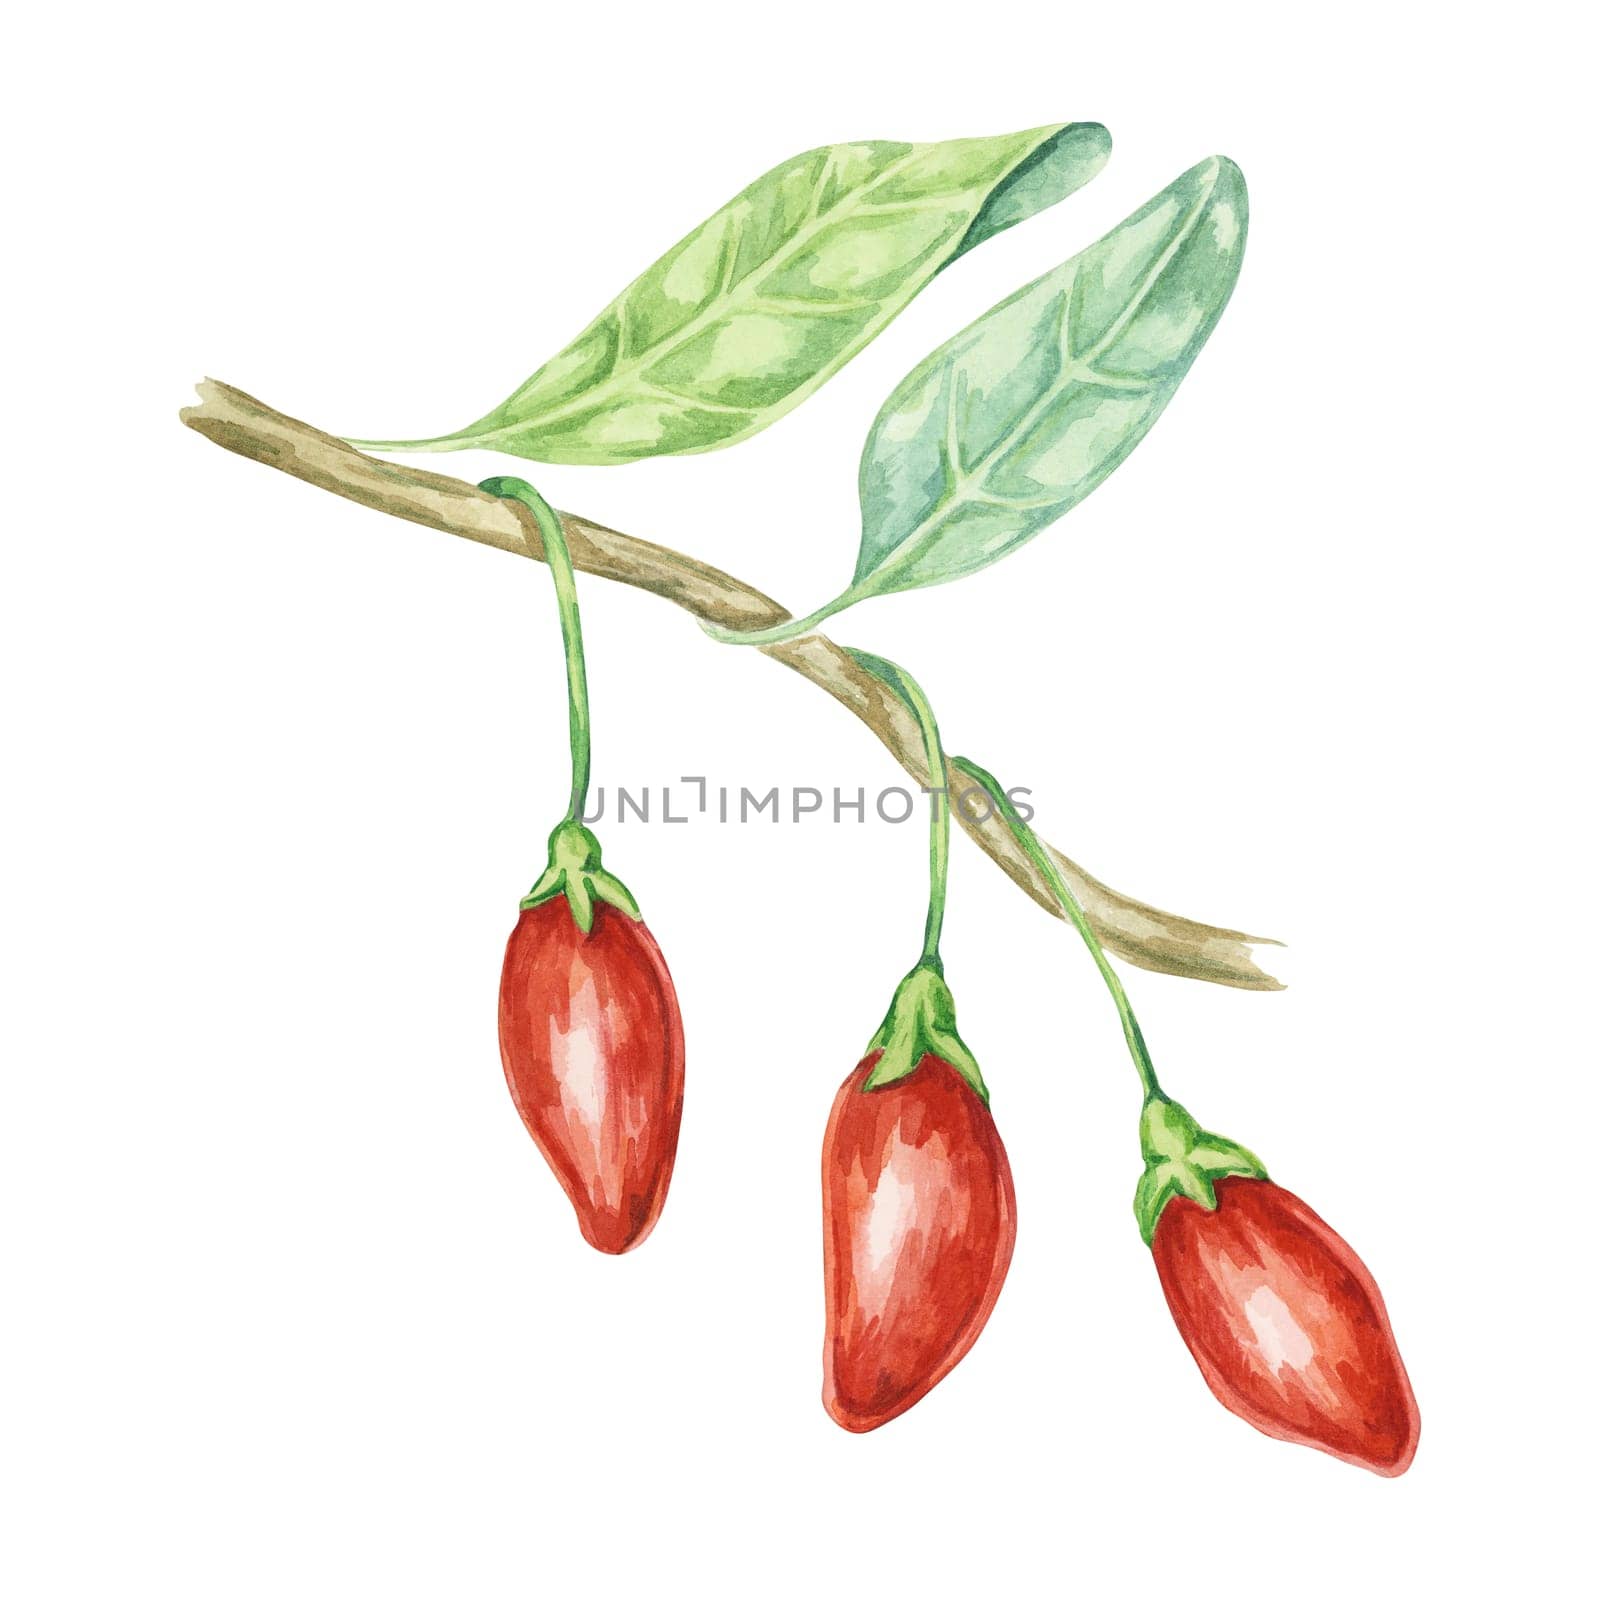 Twig of the goji berry plant in watercolor by Fofito